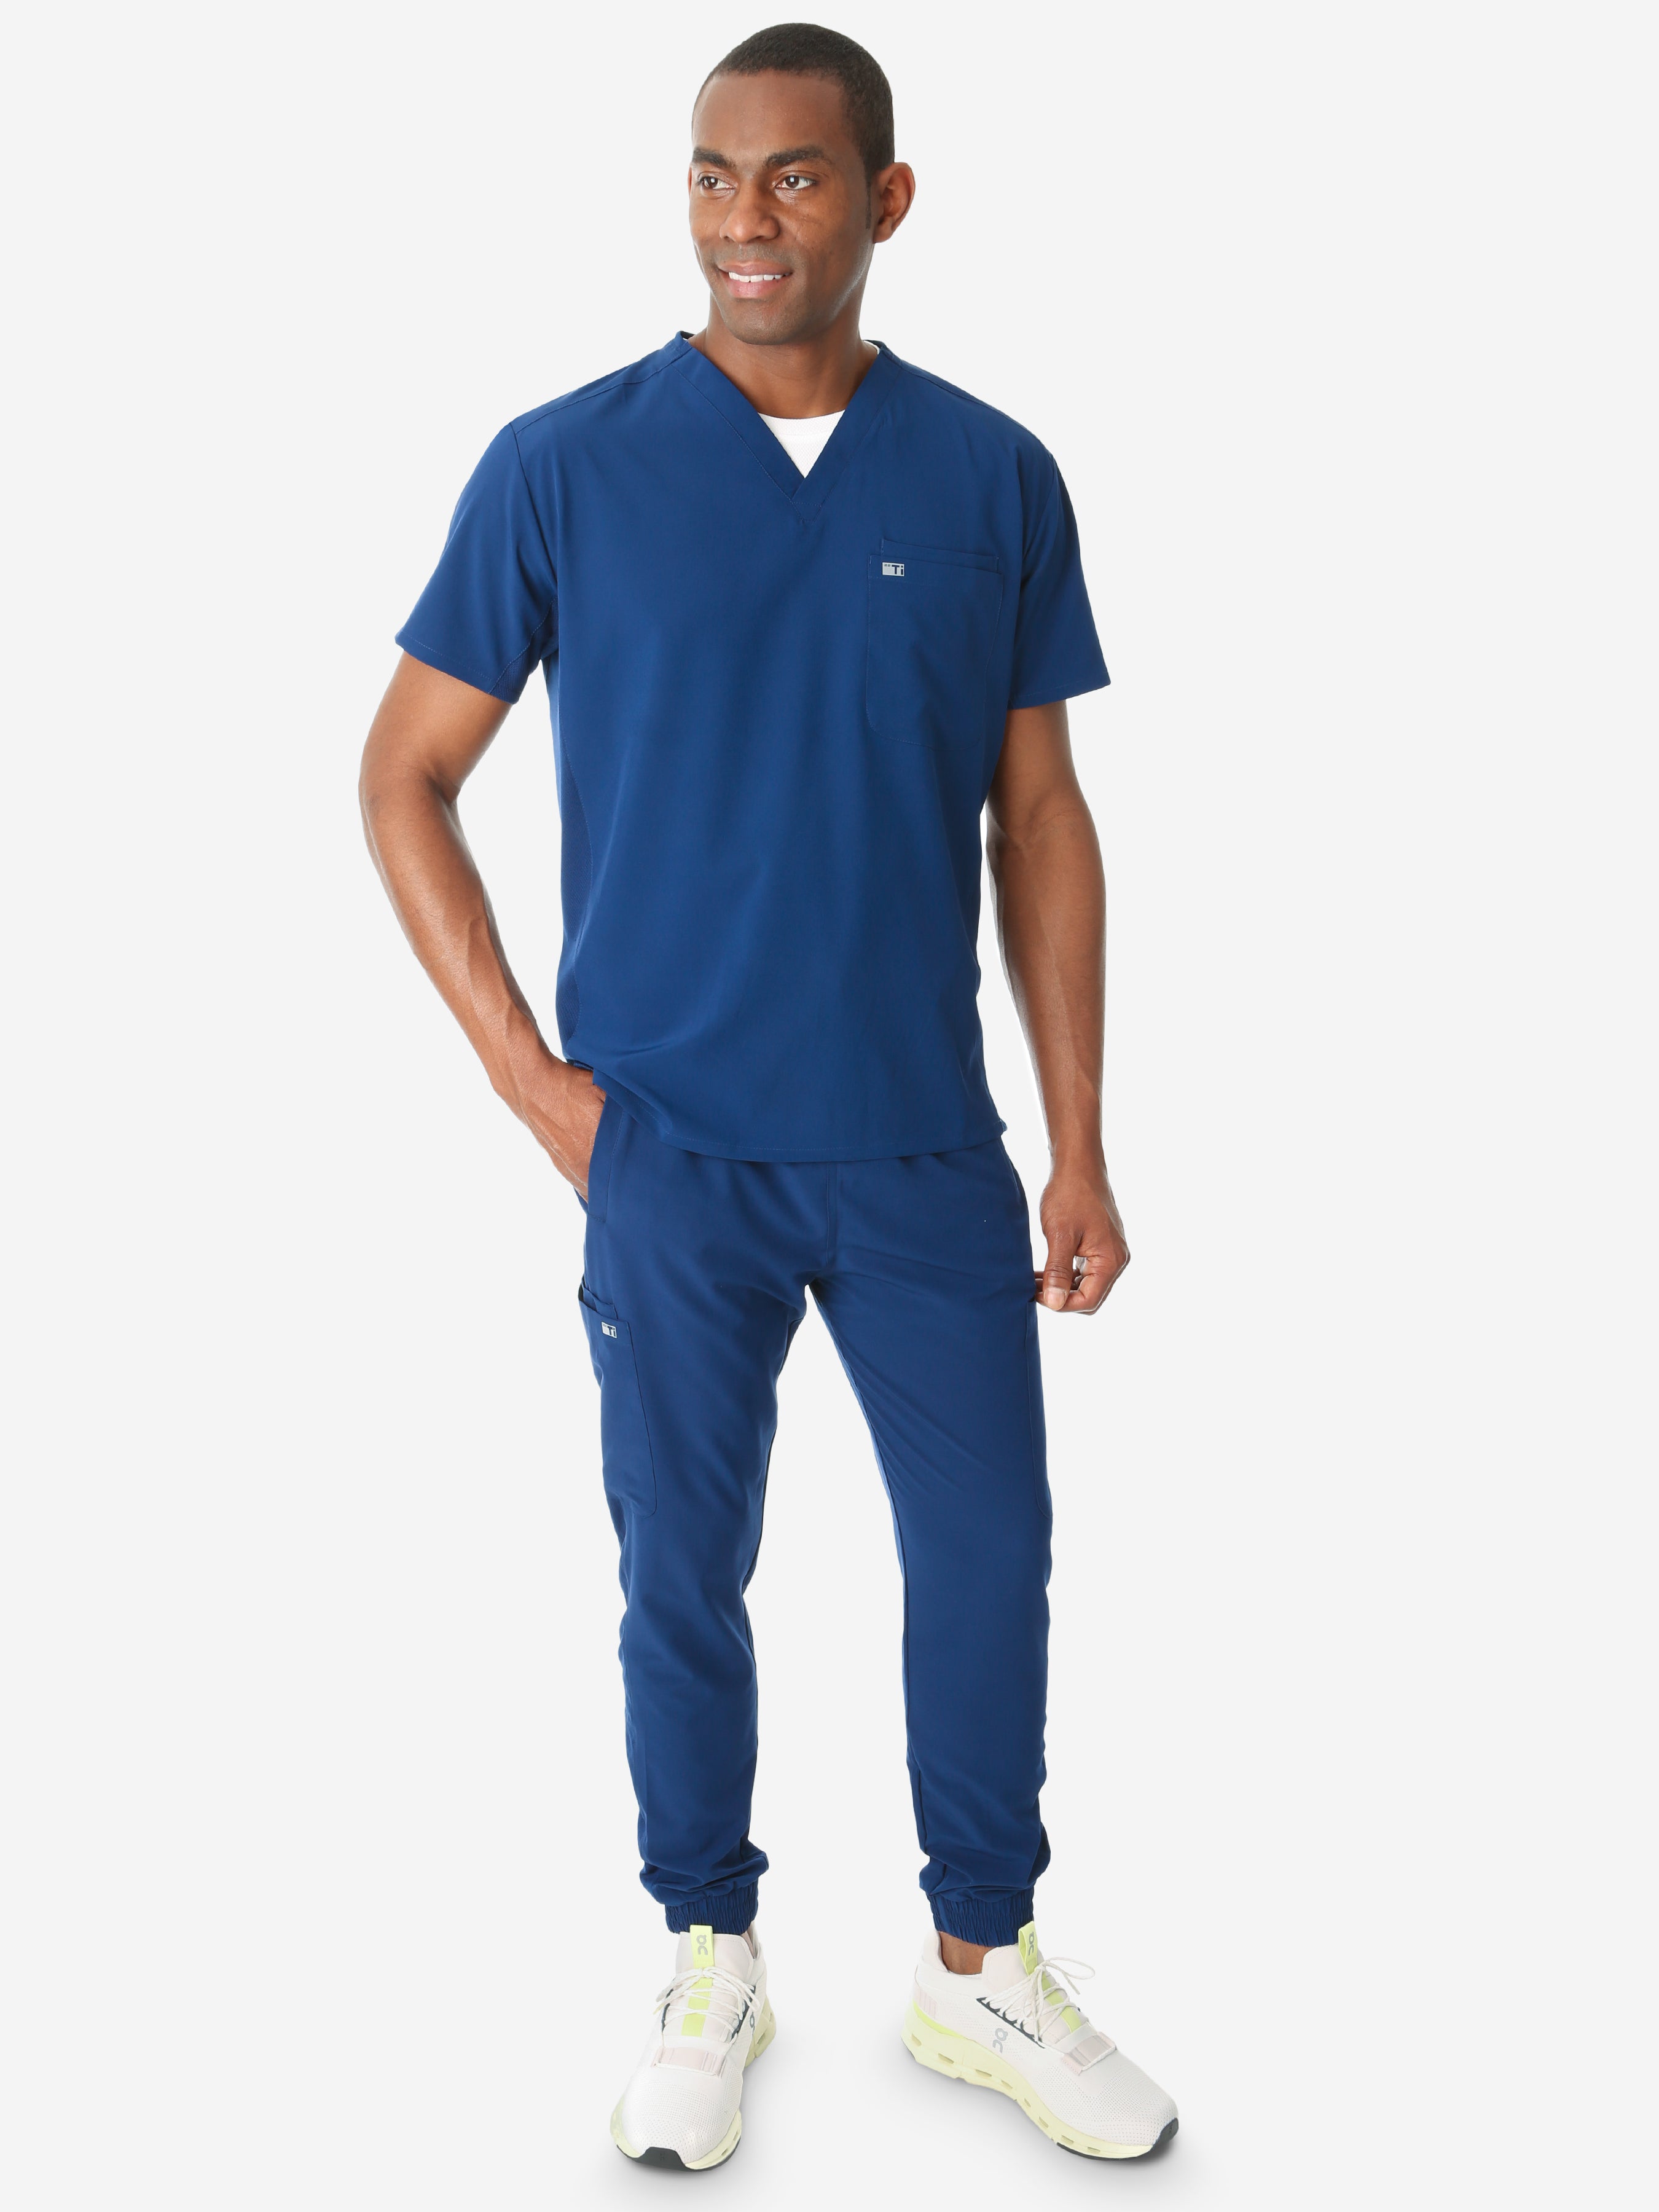 TiScrubs Stretch Navy Blue Men's Jogger Scrub Pants and Double-Pocket Top Untucked Full Body Front